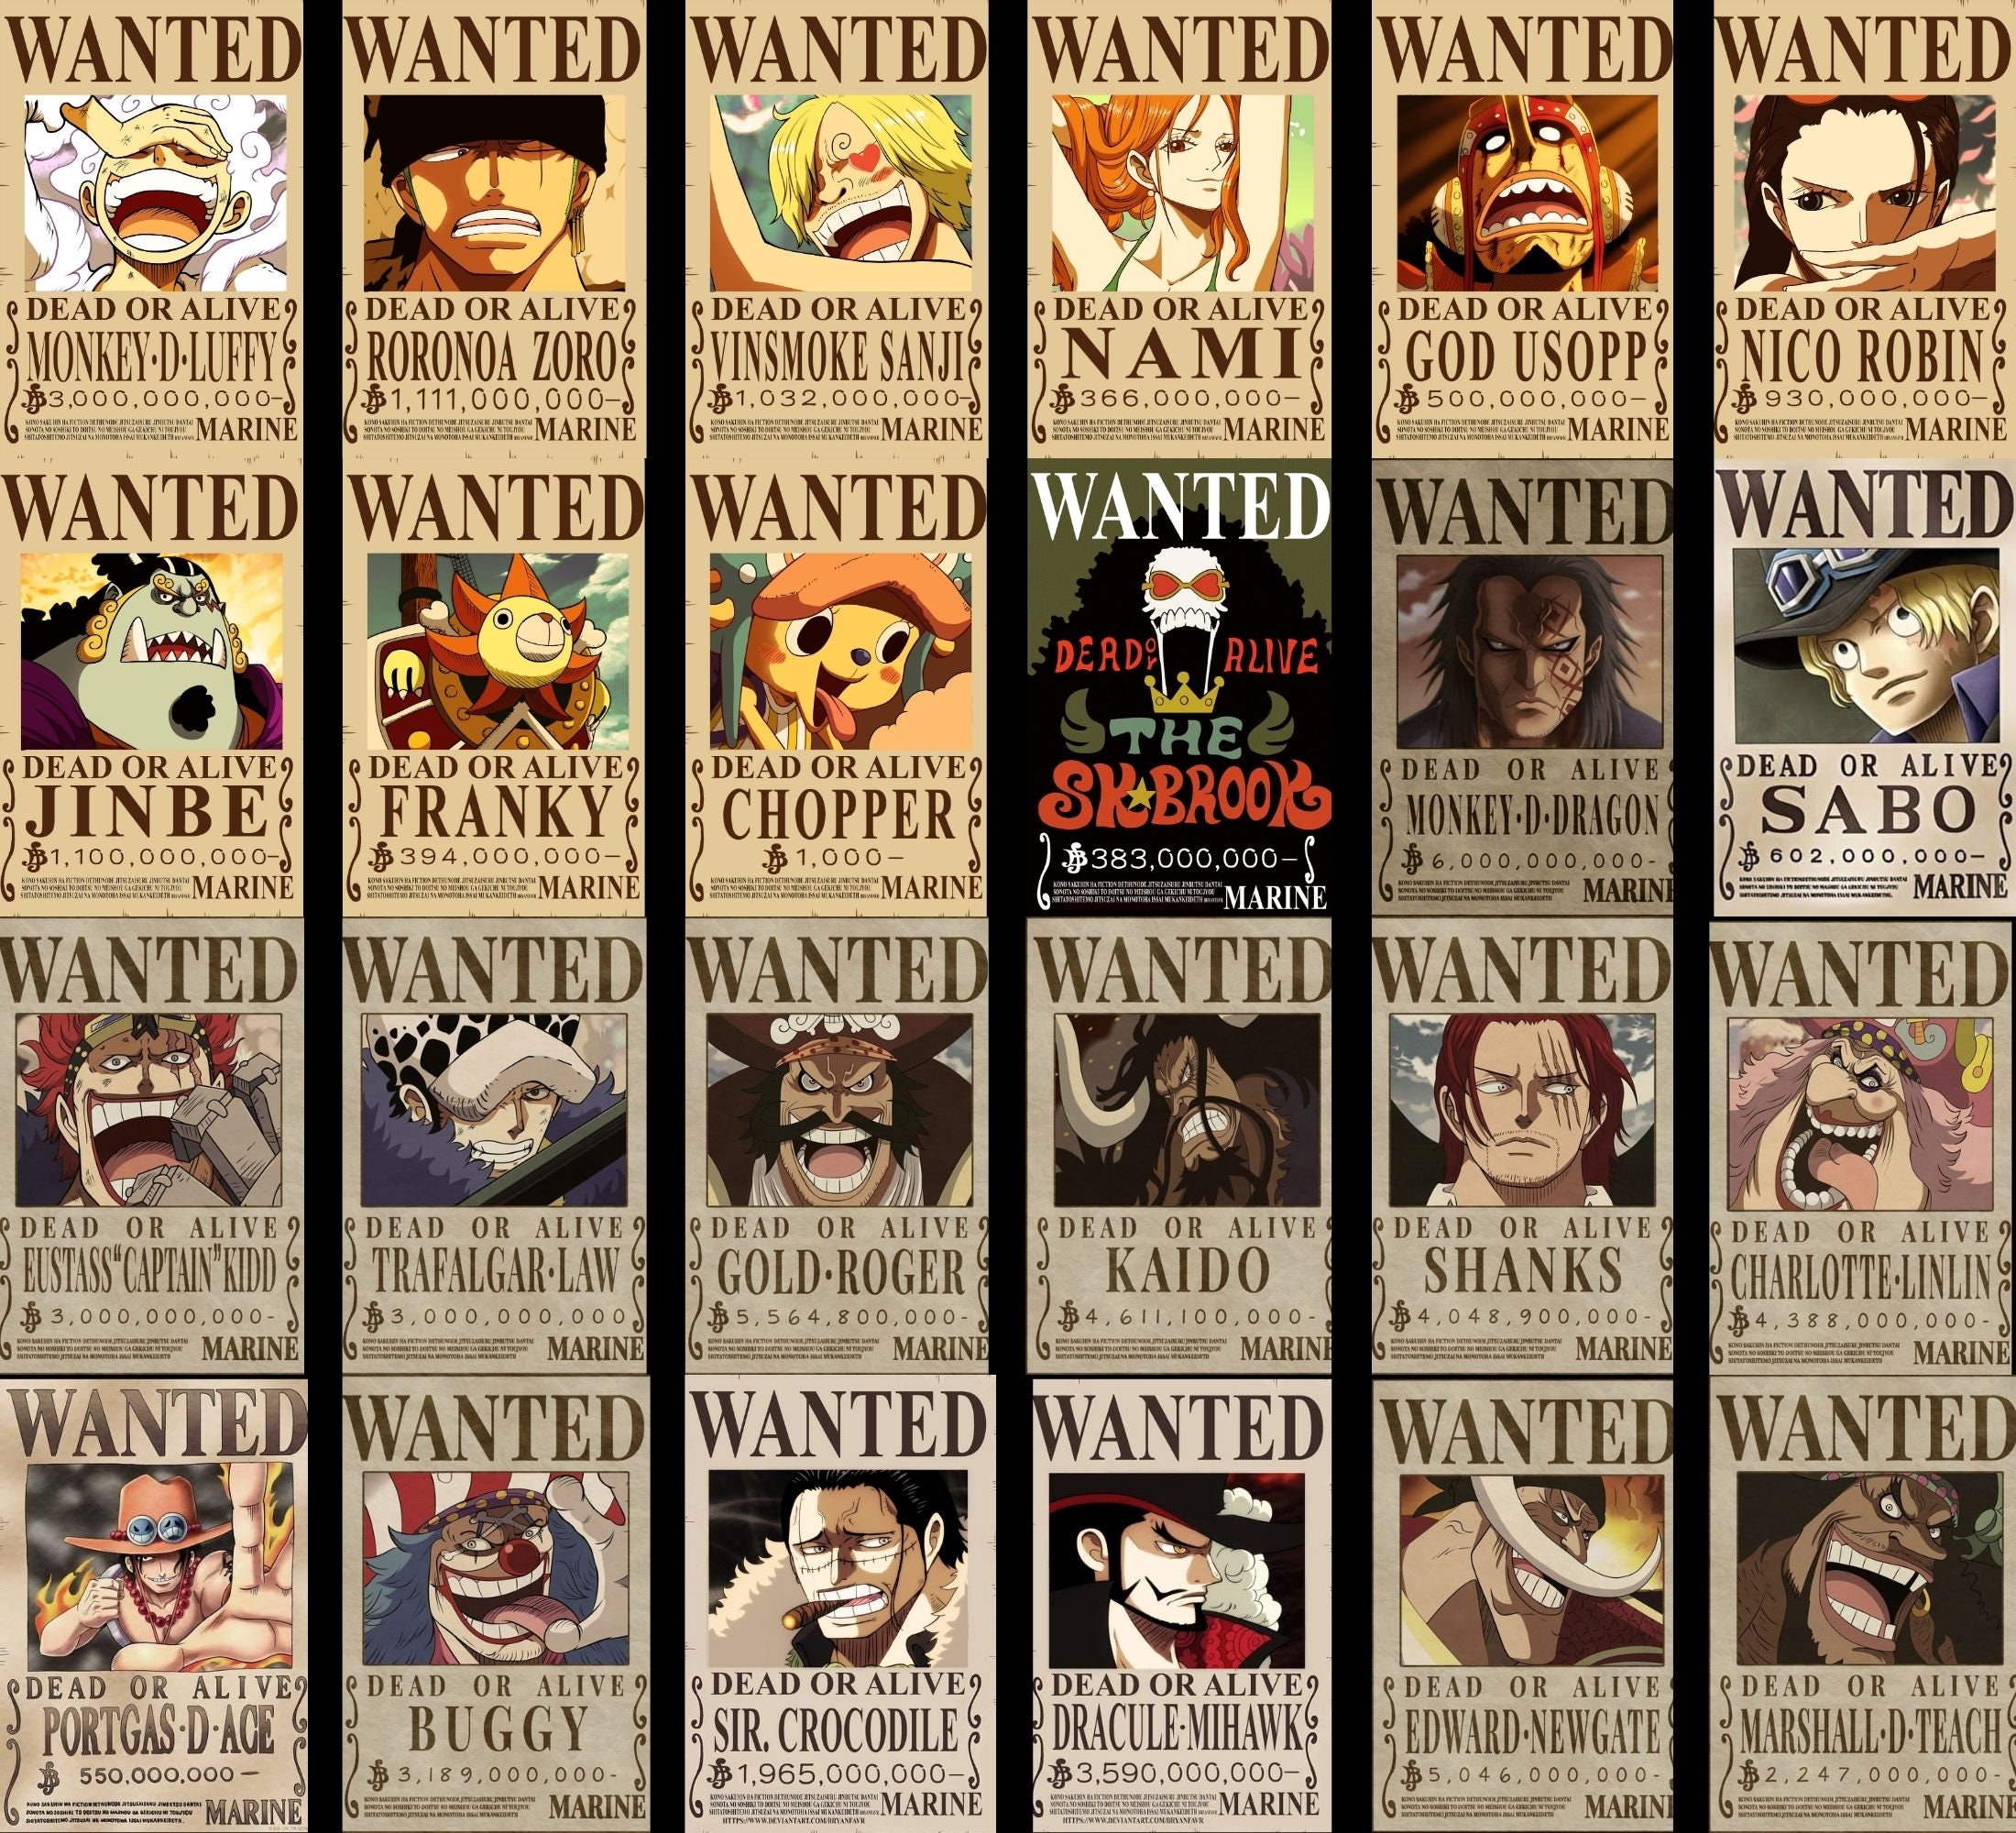 One Piece] Official Navy Wanted Posters Nico Robin [Vol 2] – Otaku